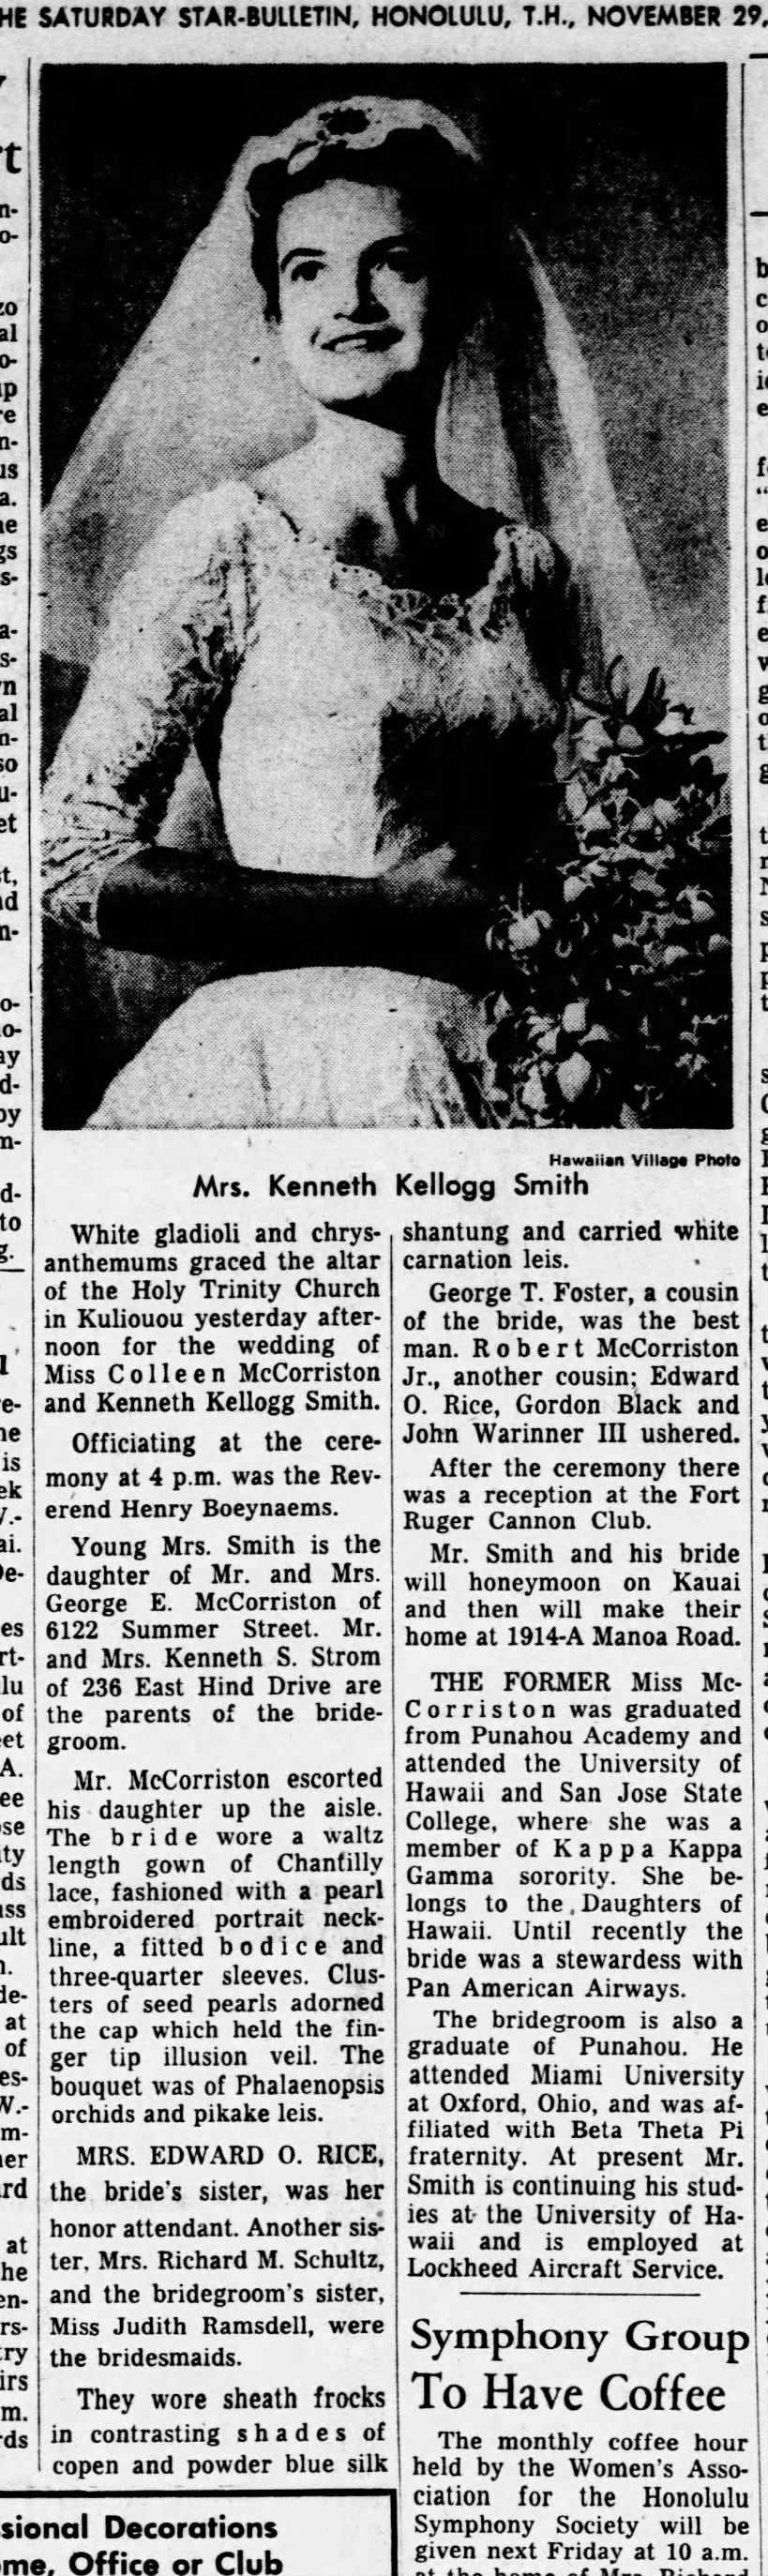 Marriage of Colleen McCorriston and Kenneth Kellogg Smith, 1958